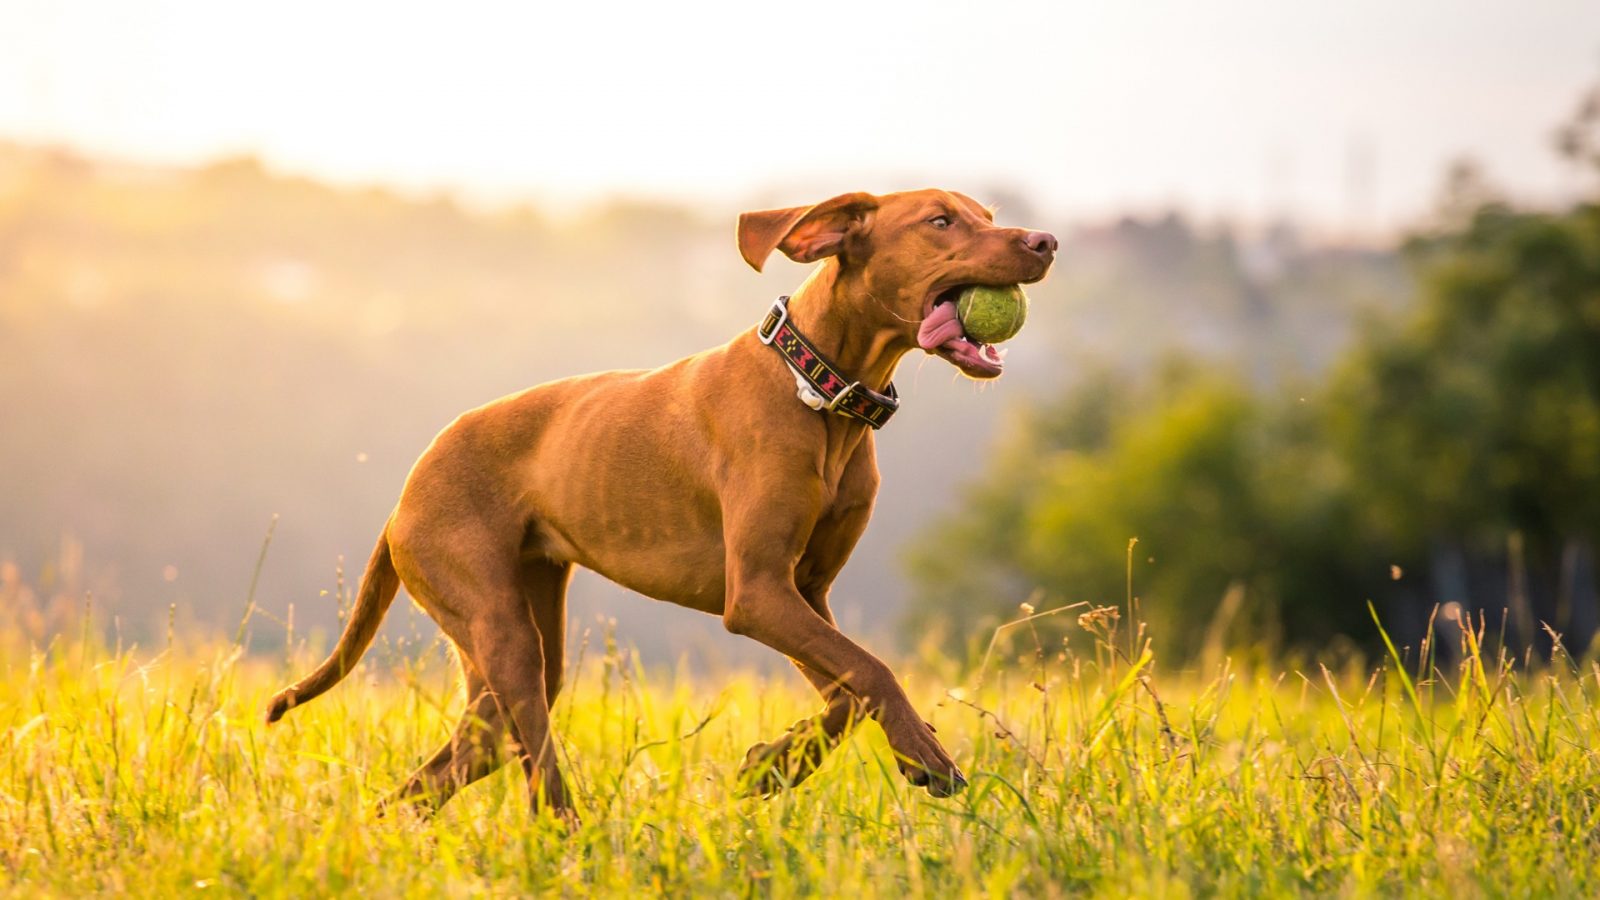 Can You Pass This Geography Quiz Where Every Question Comes With a 🐶 Dog-Related Clue? Hungarian Vizsla